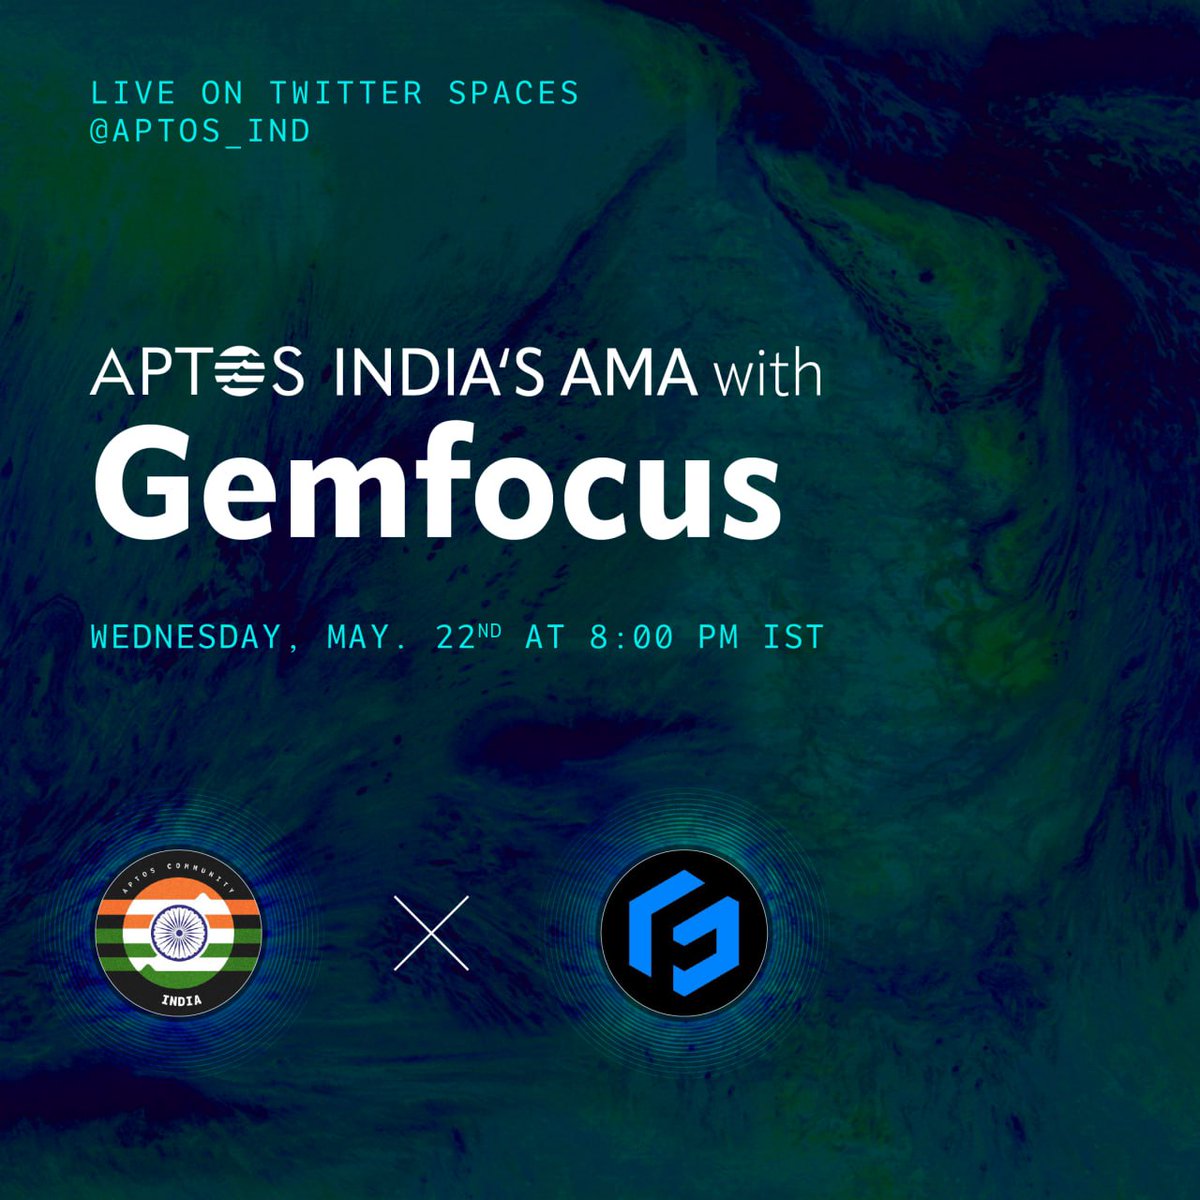 Aptos India's Twitter Space with Gemfocus 📊

@Gemfocus_io - an Aptos Foundation grant recipient, is an analytical platform on the #Aptos blockchain that delivers data-driven insights for smarter trading decisions.

We have scheduled a Twitter space with them this Wednesday,  May